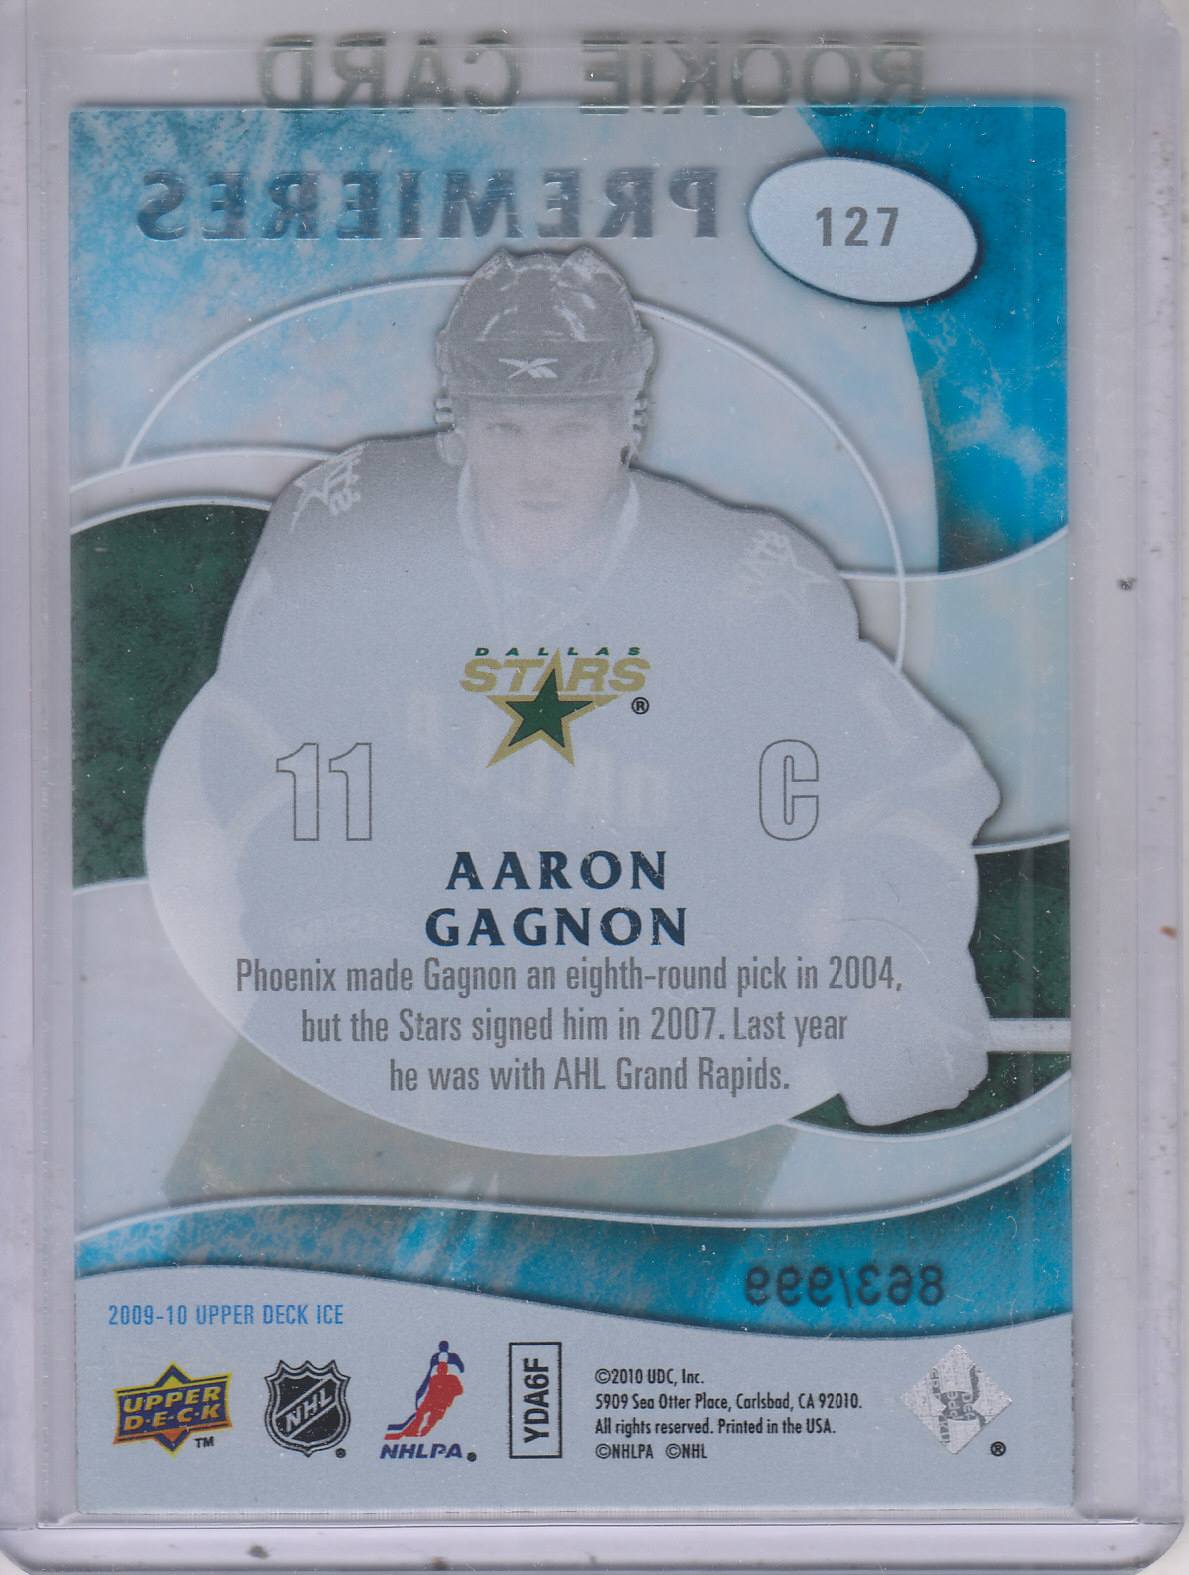 2009-10 Upper Deck Ice #127 Aaron Gagnon RC back image